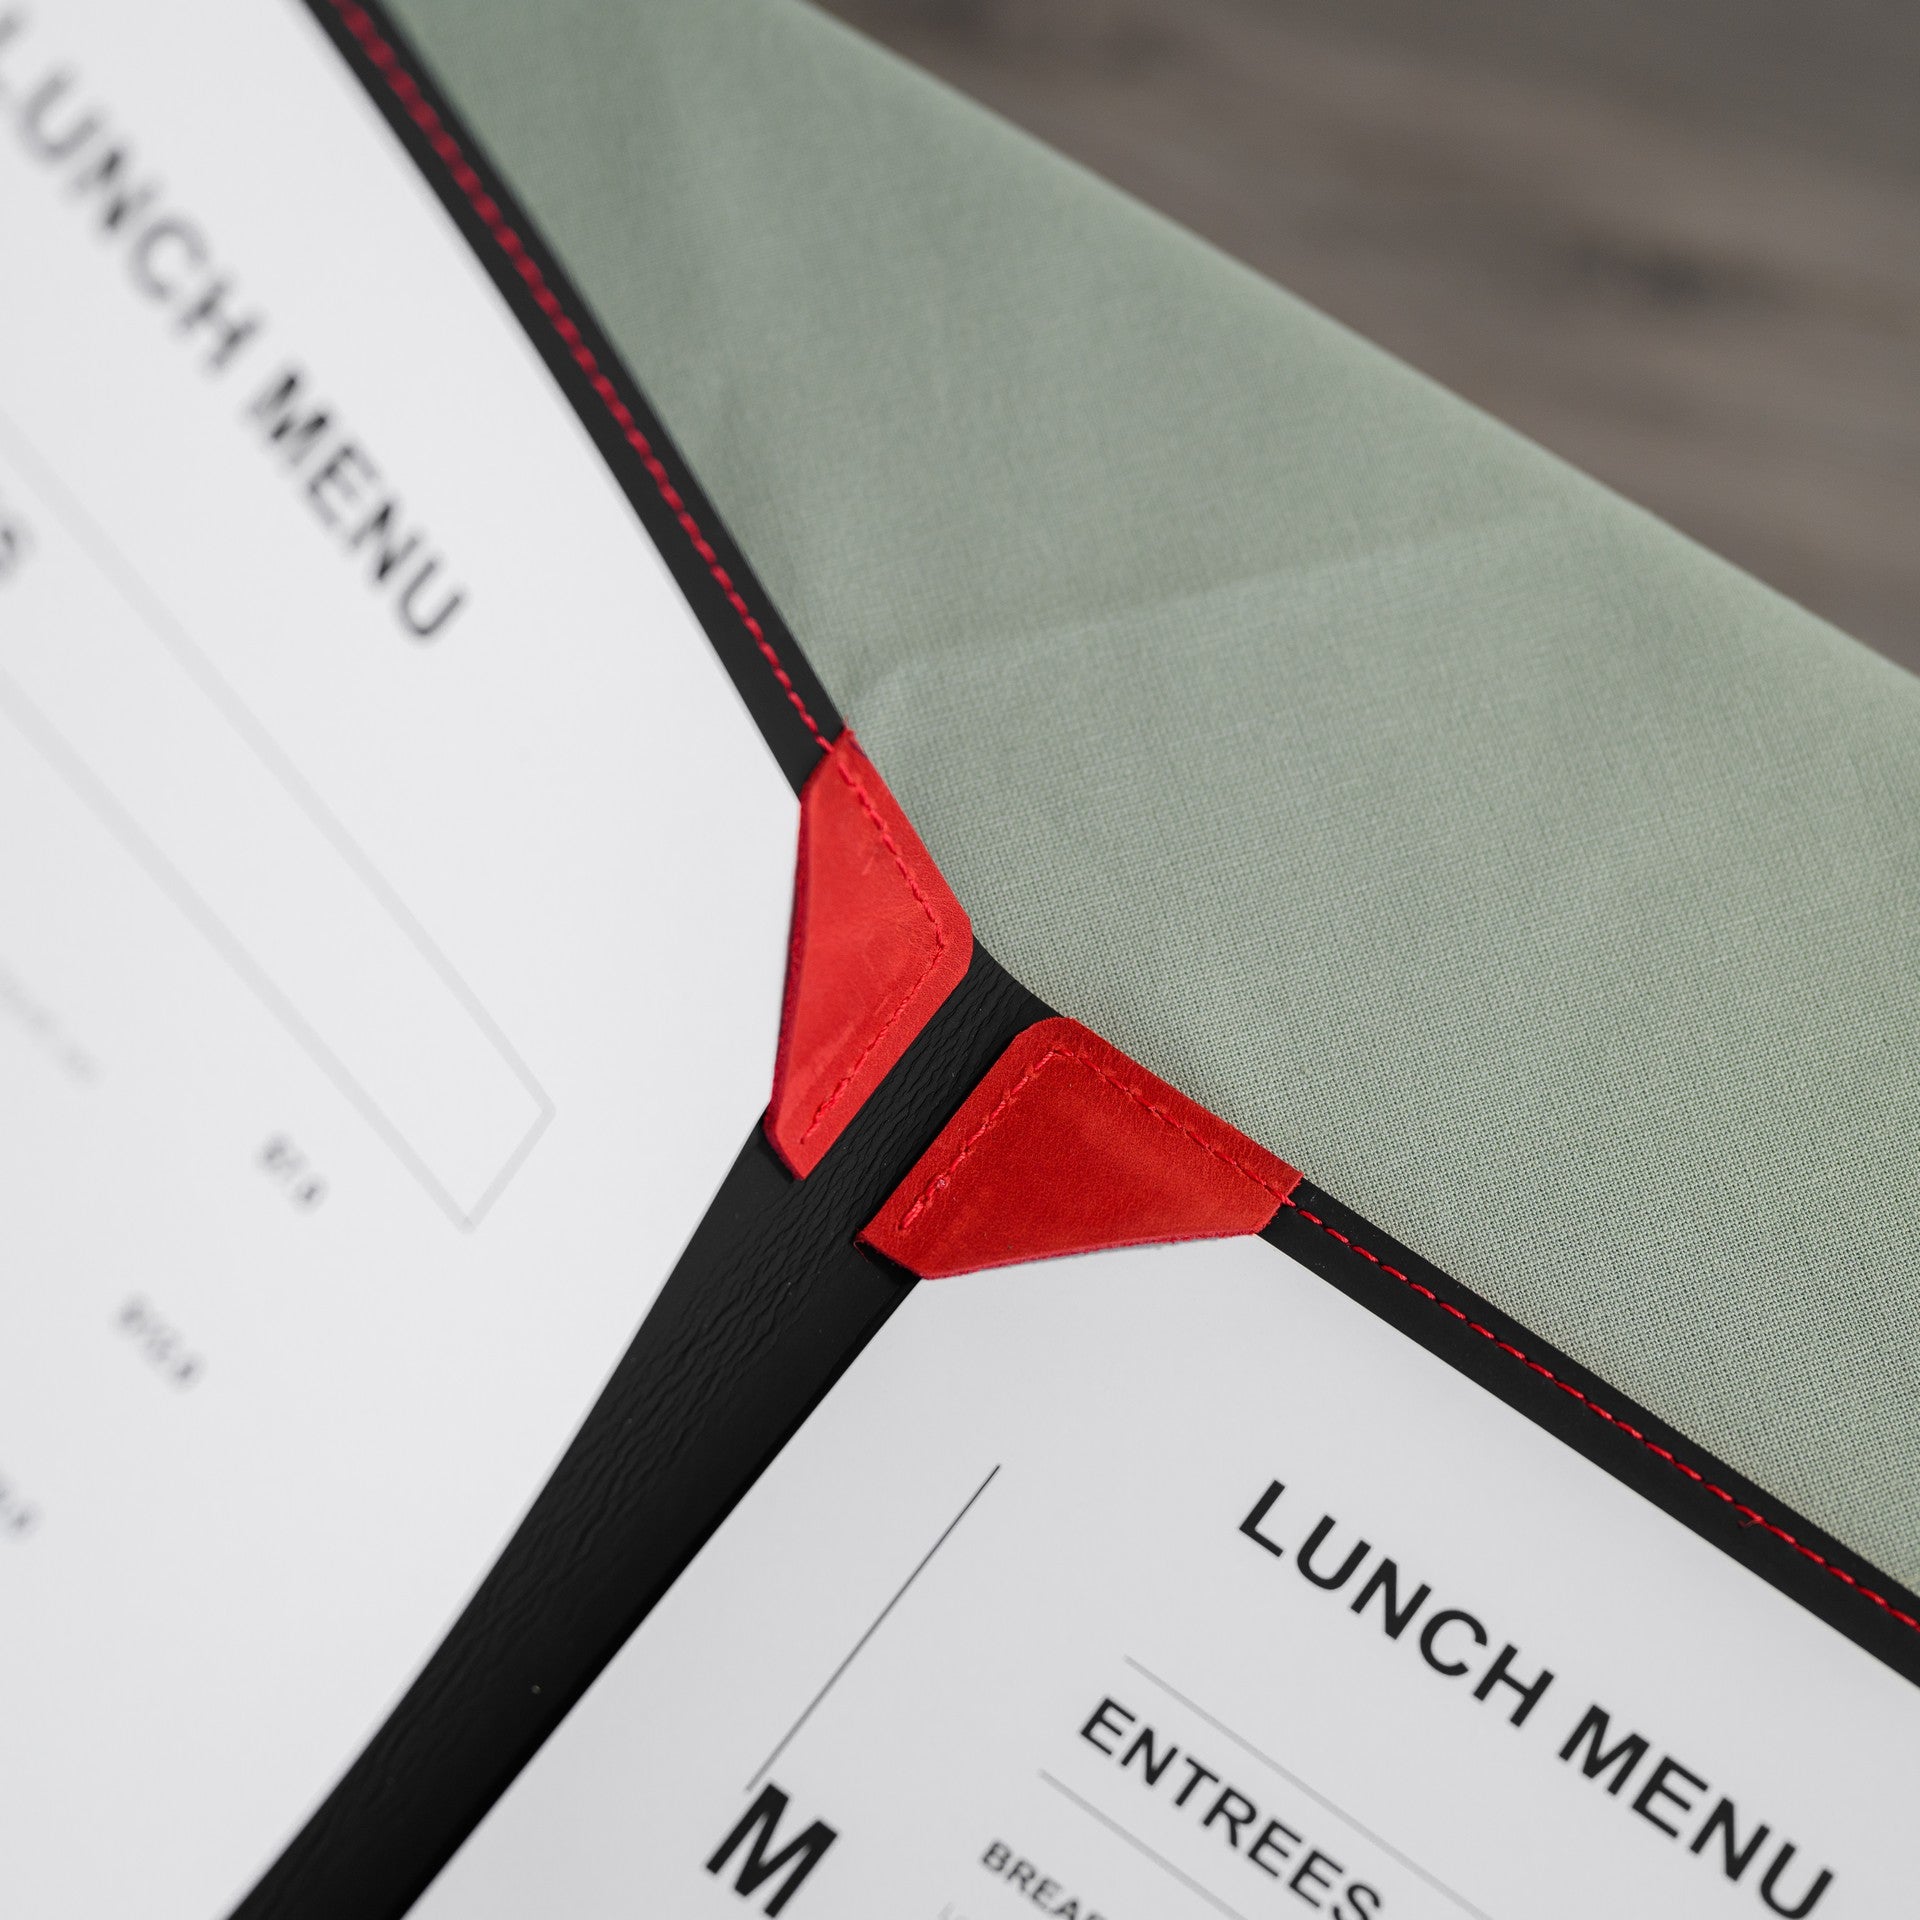 Functional Menu Cover with Corner Mountings, ensuring stability and ease of use for your menu display.